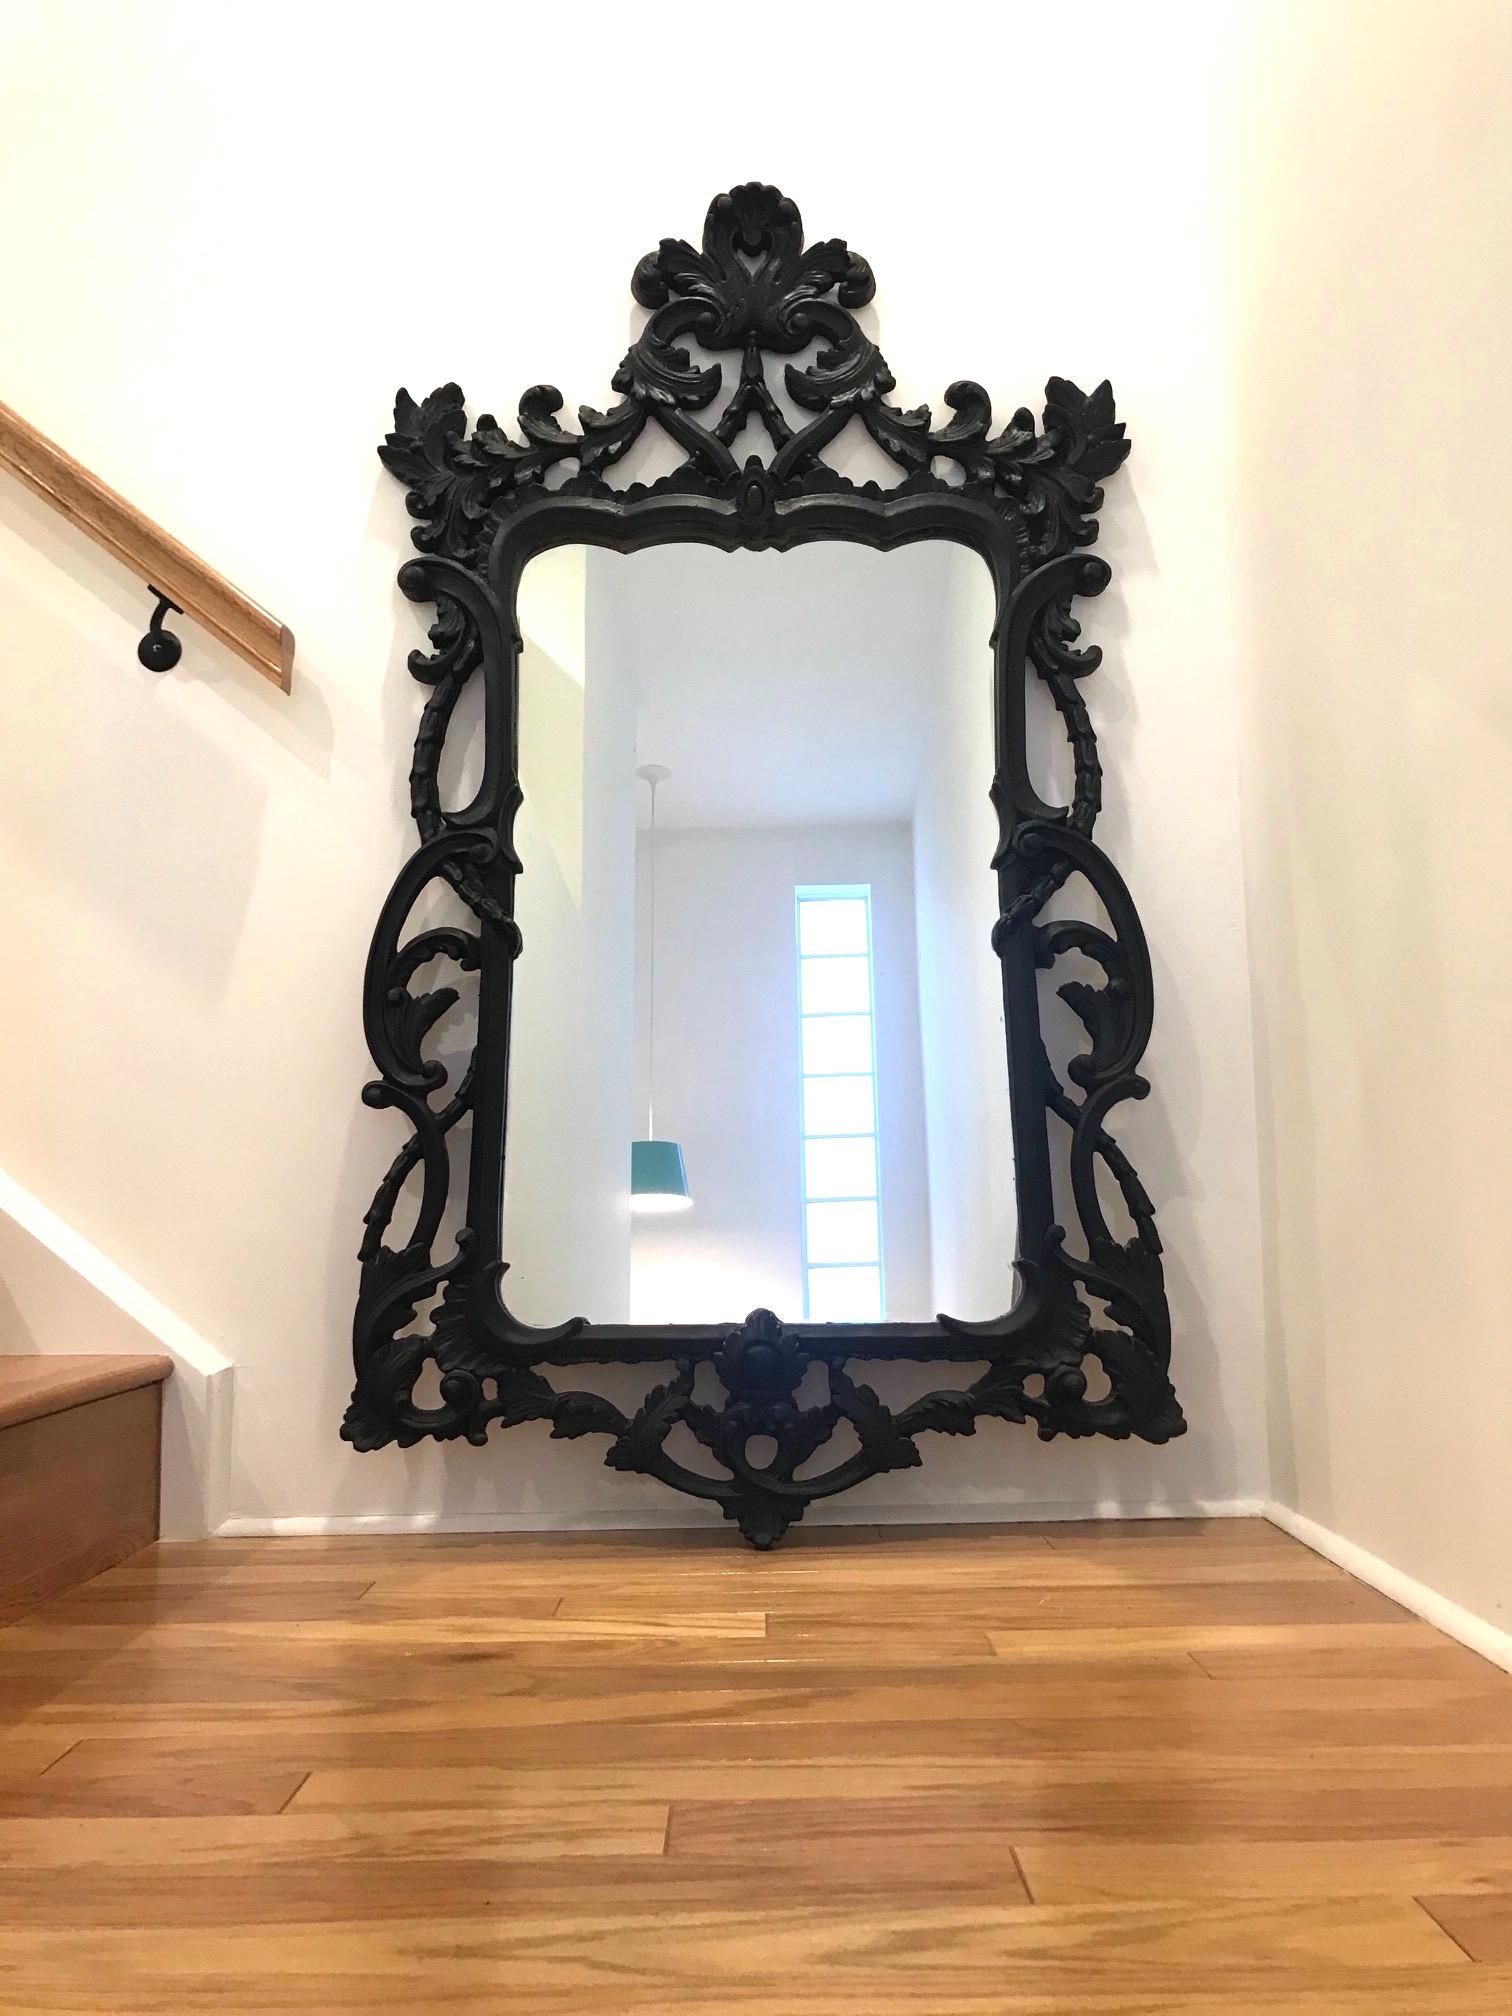 Hollywood Regency Rococo Mirror in Black Carved Wood, Italy C. 1970's For Sale 3